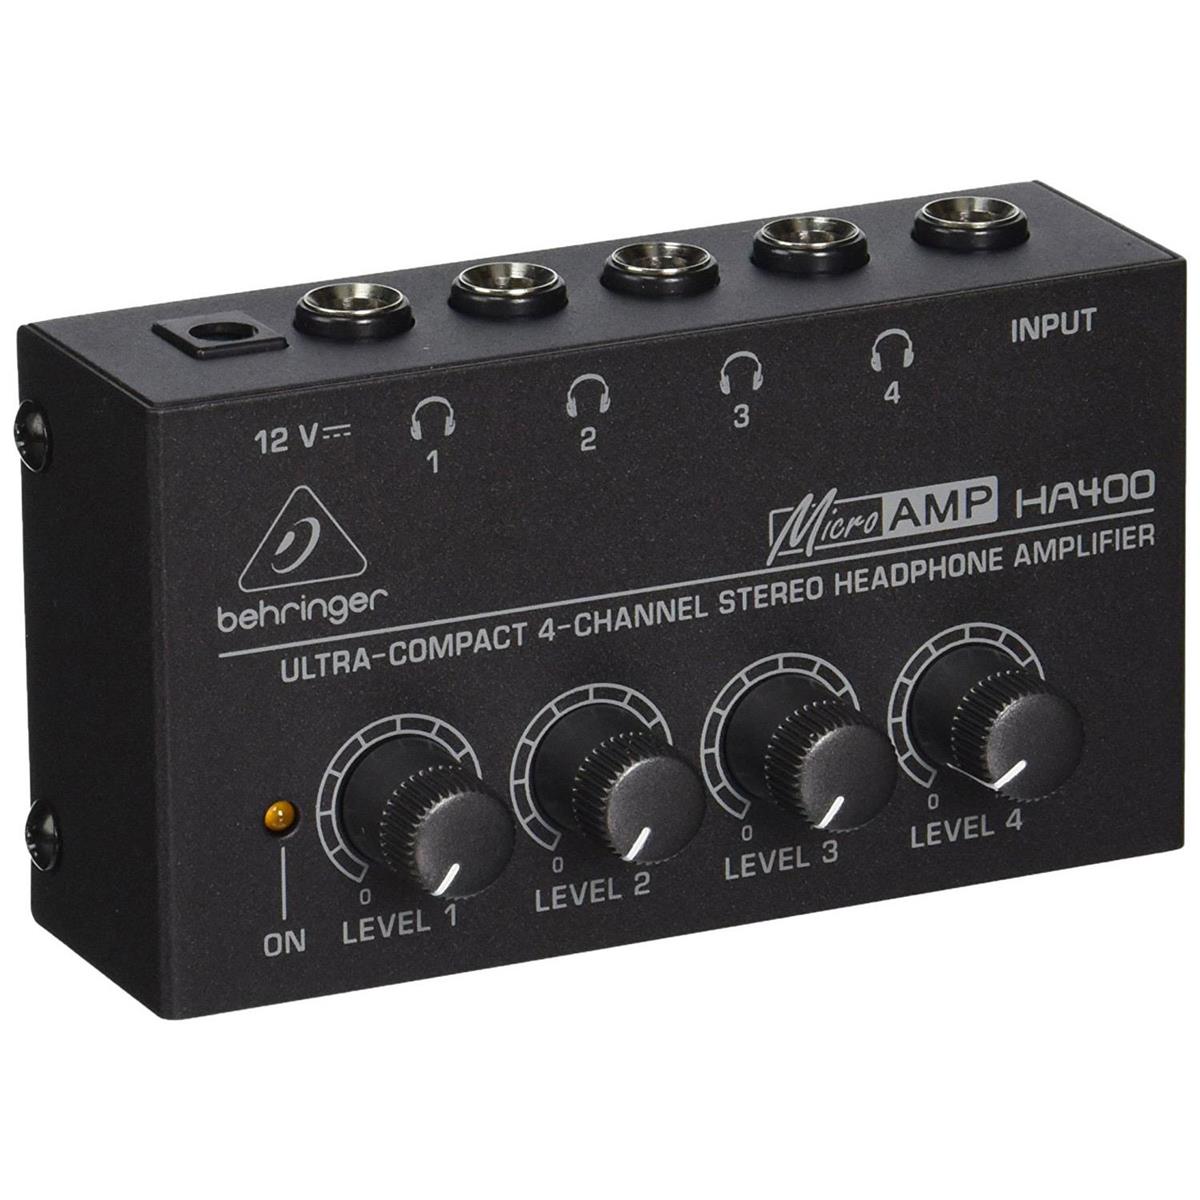 Image of Behringer HA-400 Ultra Compact 4-Channel Stereo Headphone Amplifier